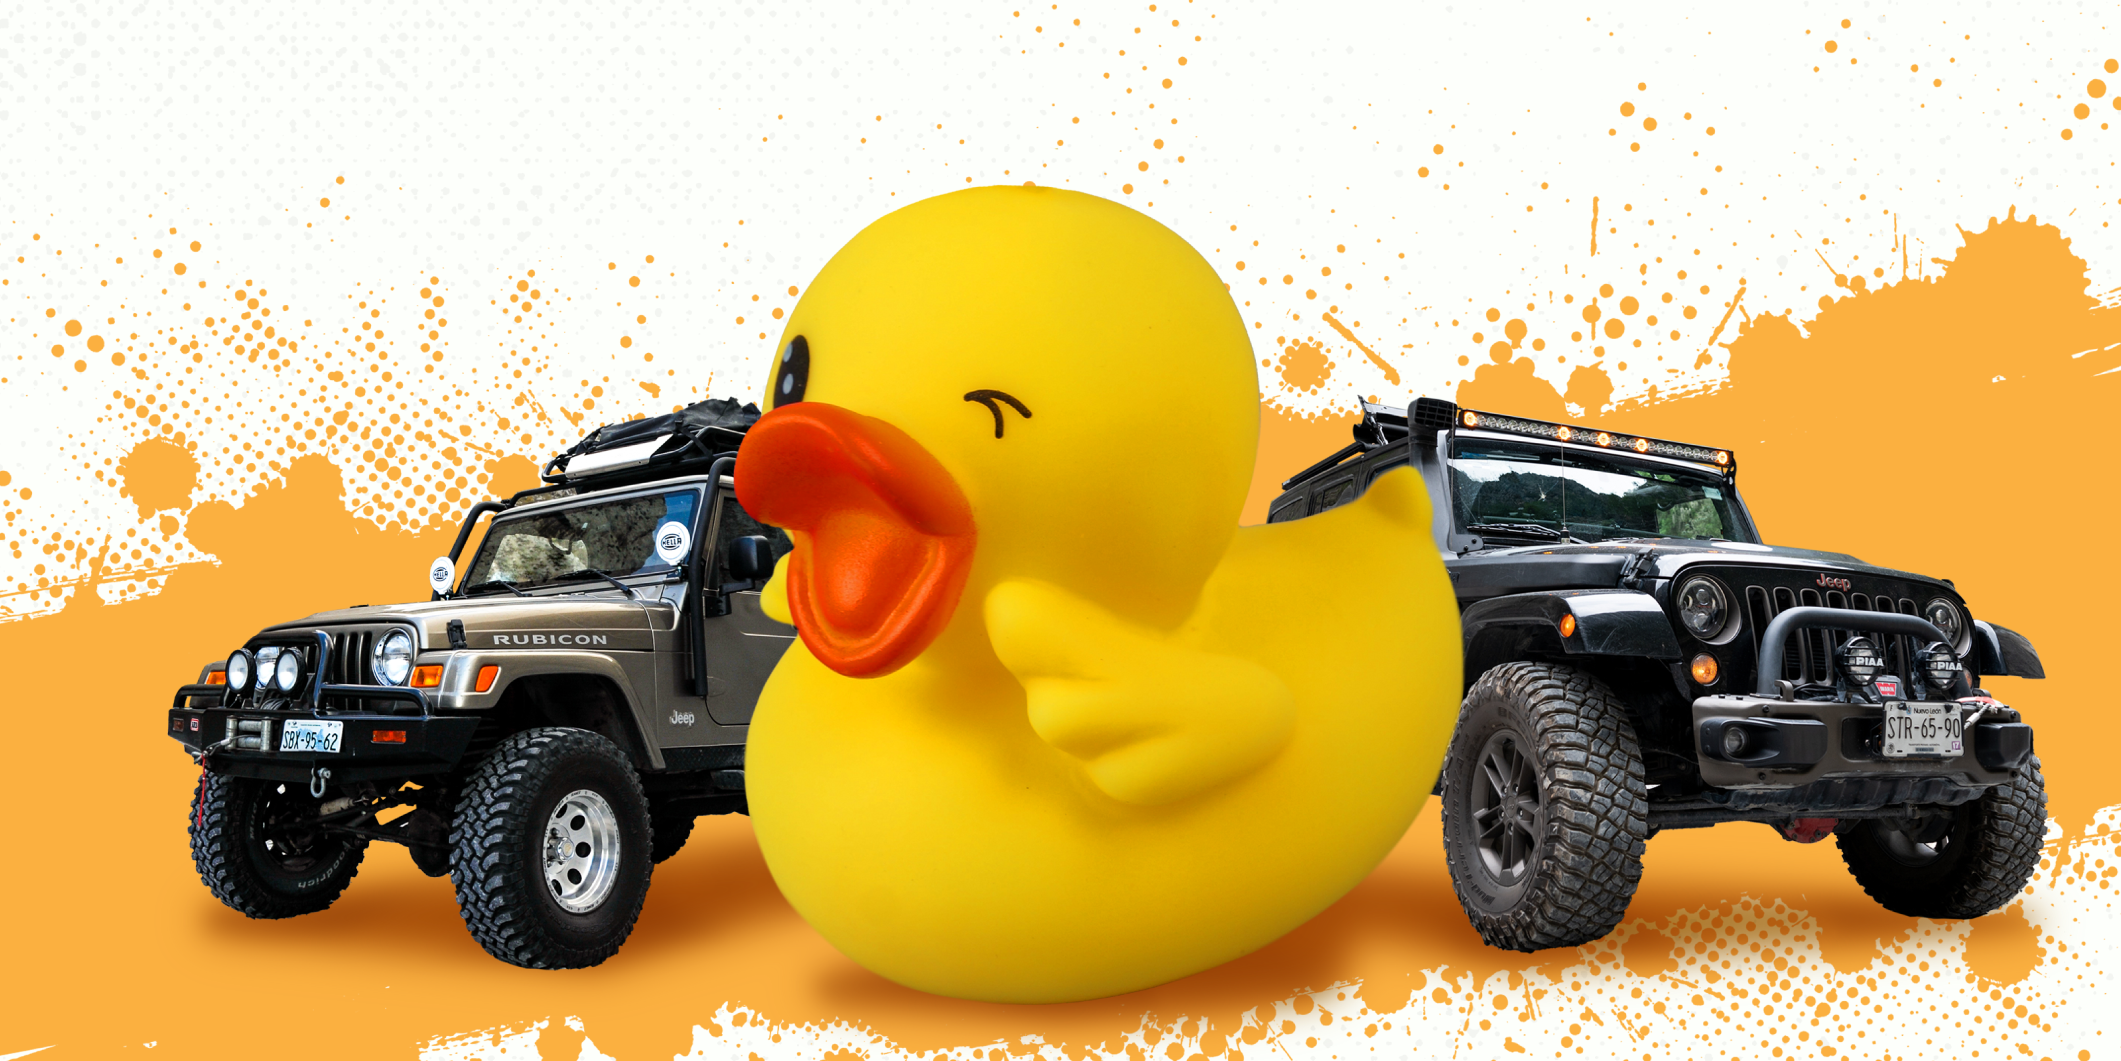 Rubber Ducks and Secret Waves: Why Everyone Wants to Own a Jeep